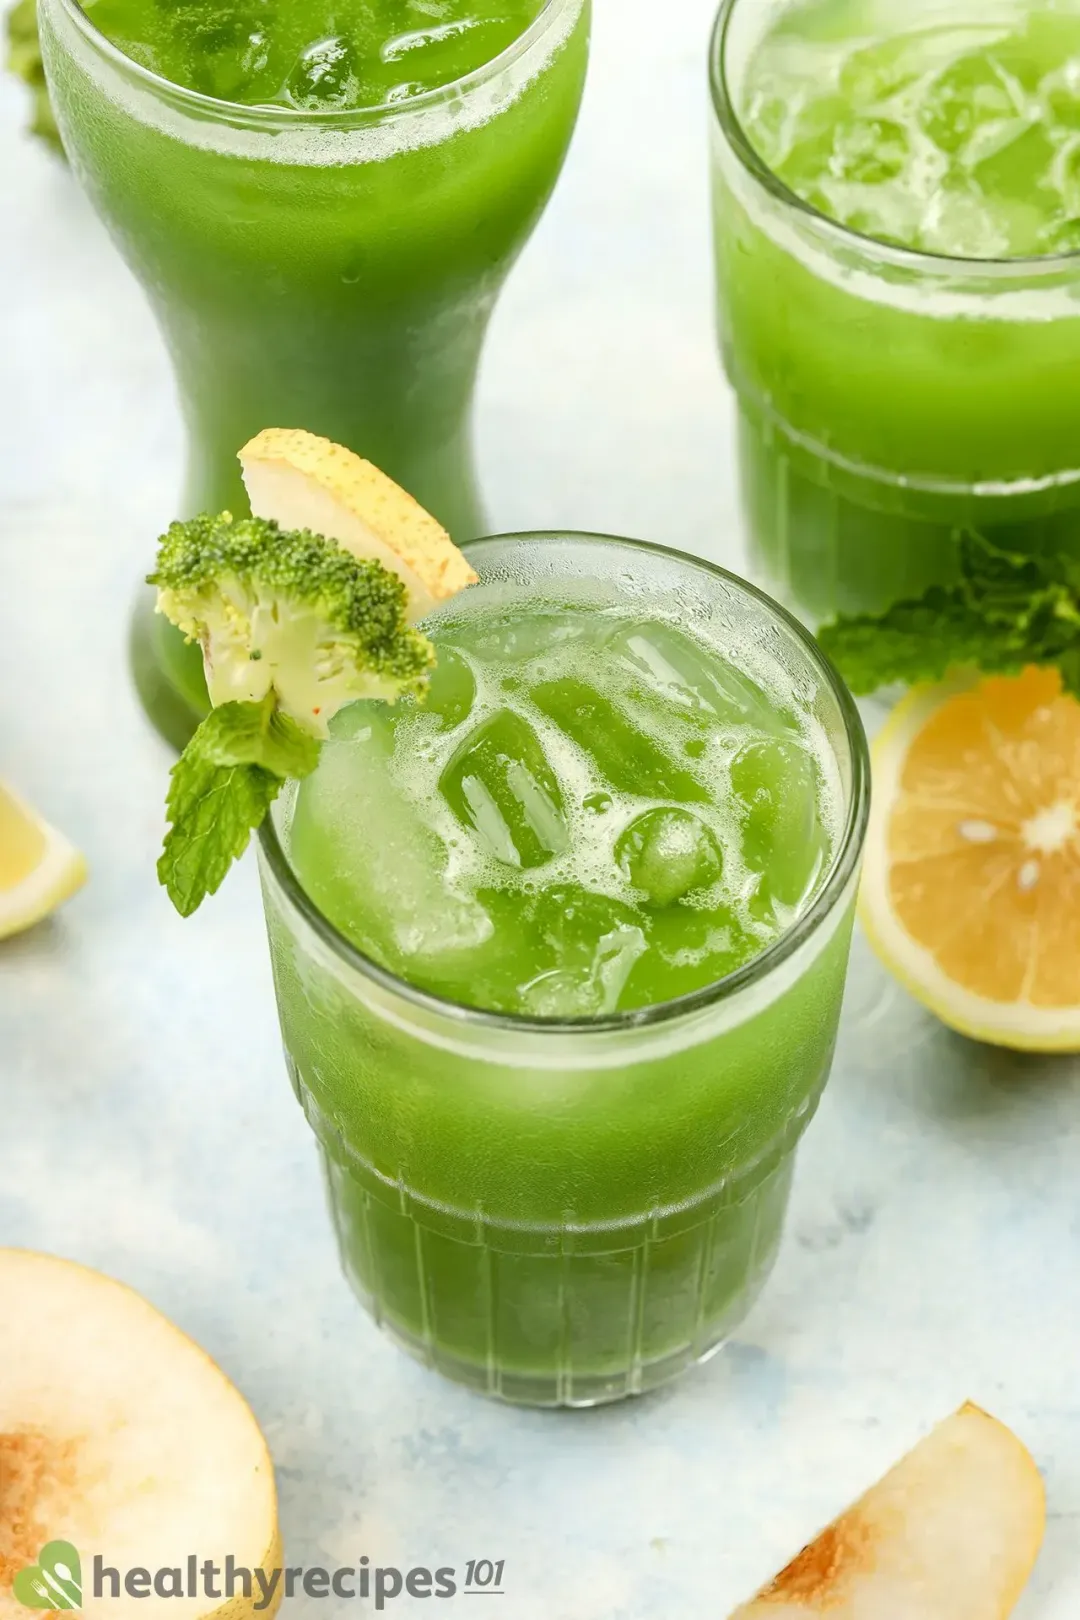 Three iced glasses of broccoli juice drinks garnished with lime wedges, mints, and next to some fruits